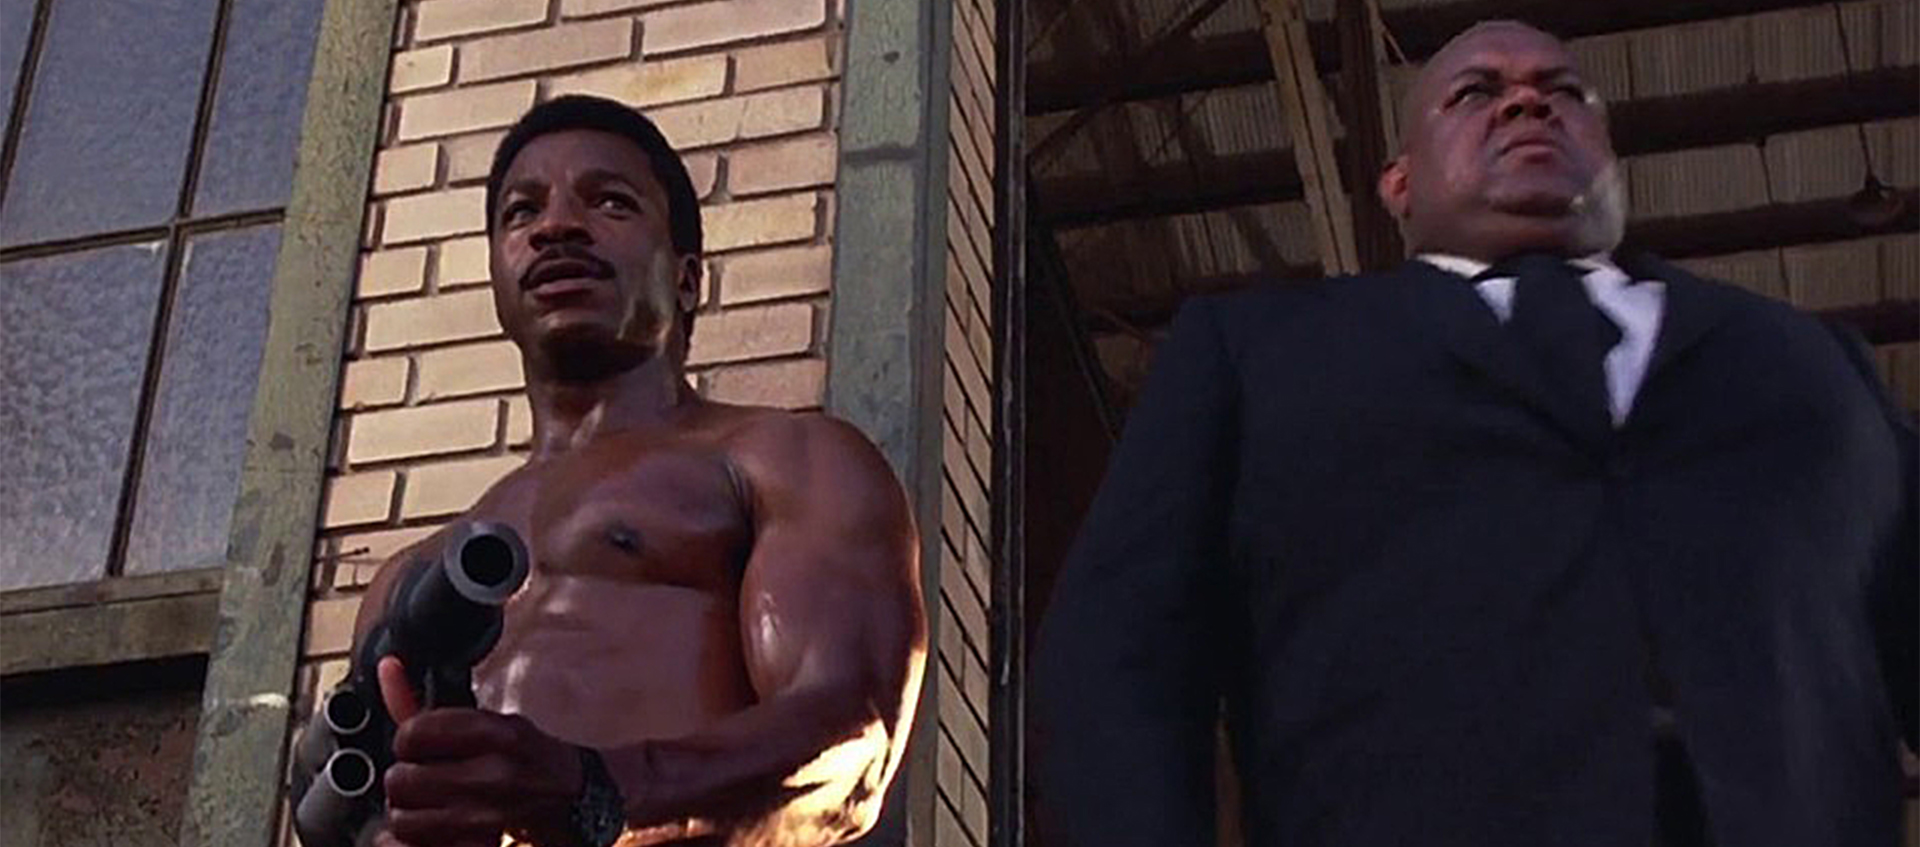 Carl Weathers, muscular and shirtless, holds a grenade launcher while standing next to a bald man in a dark suit